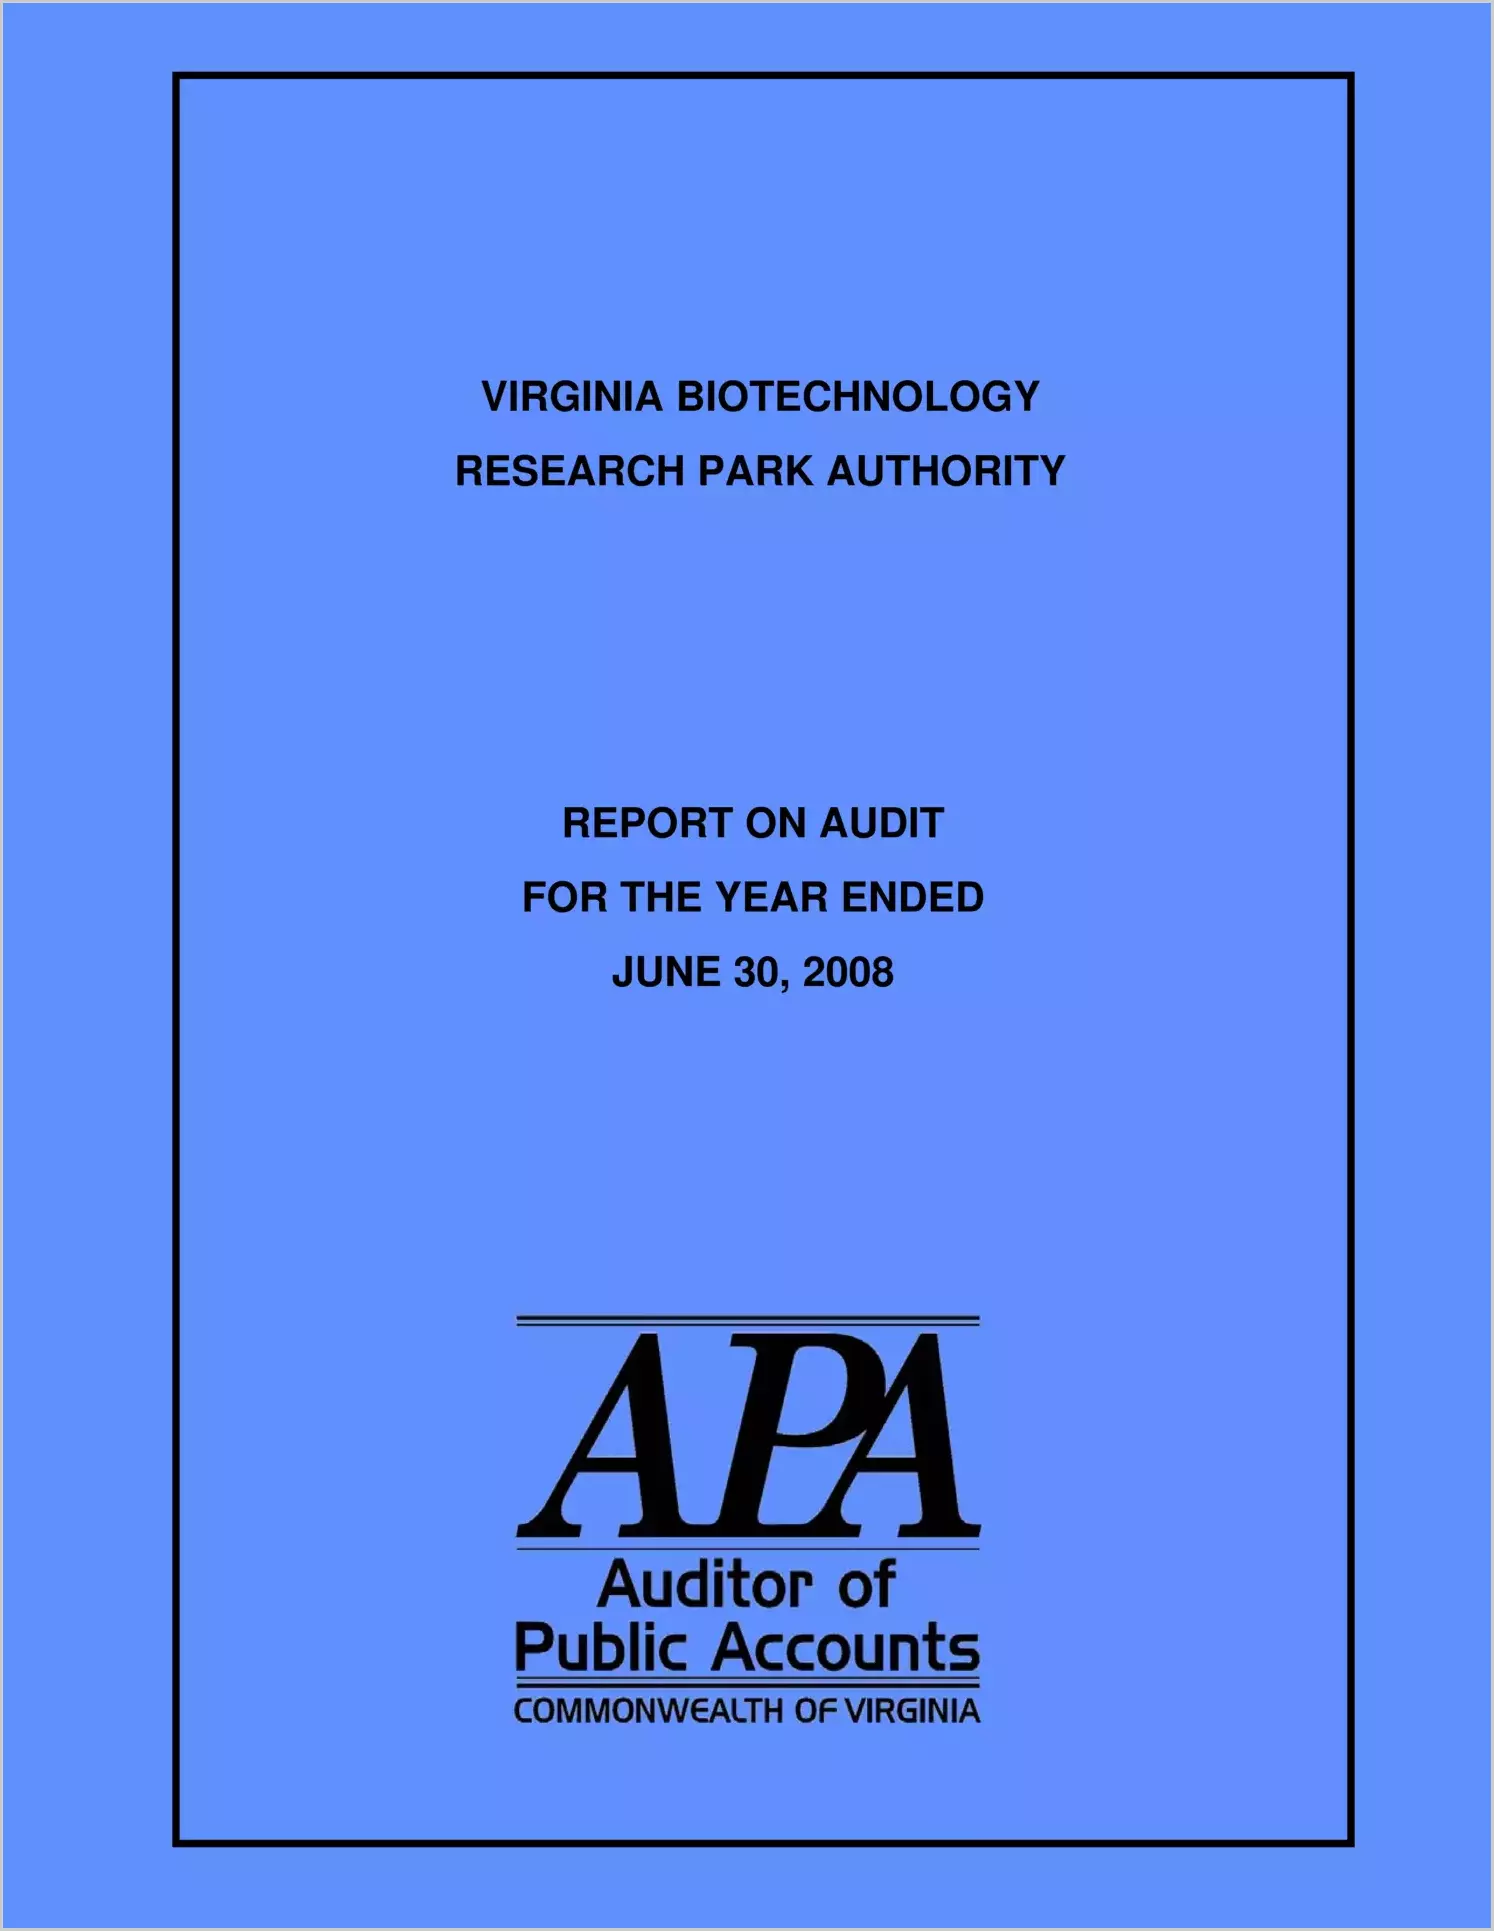 Virginia Biotechnology Research Parntership Authority for the year ended June 30, 2008